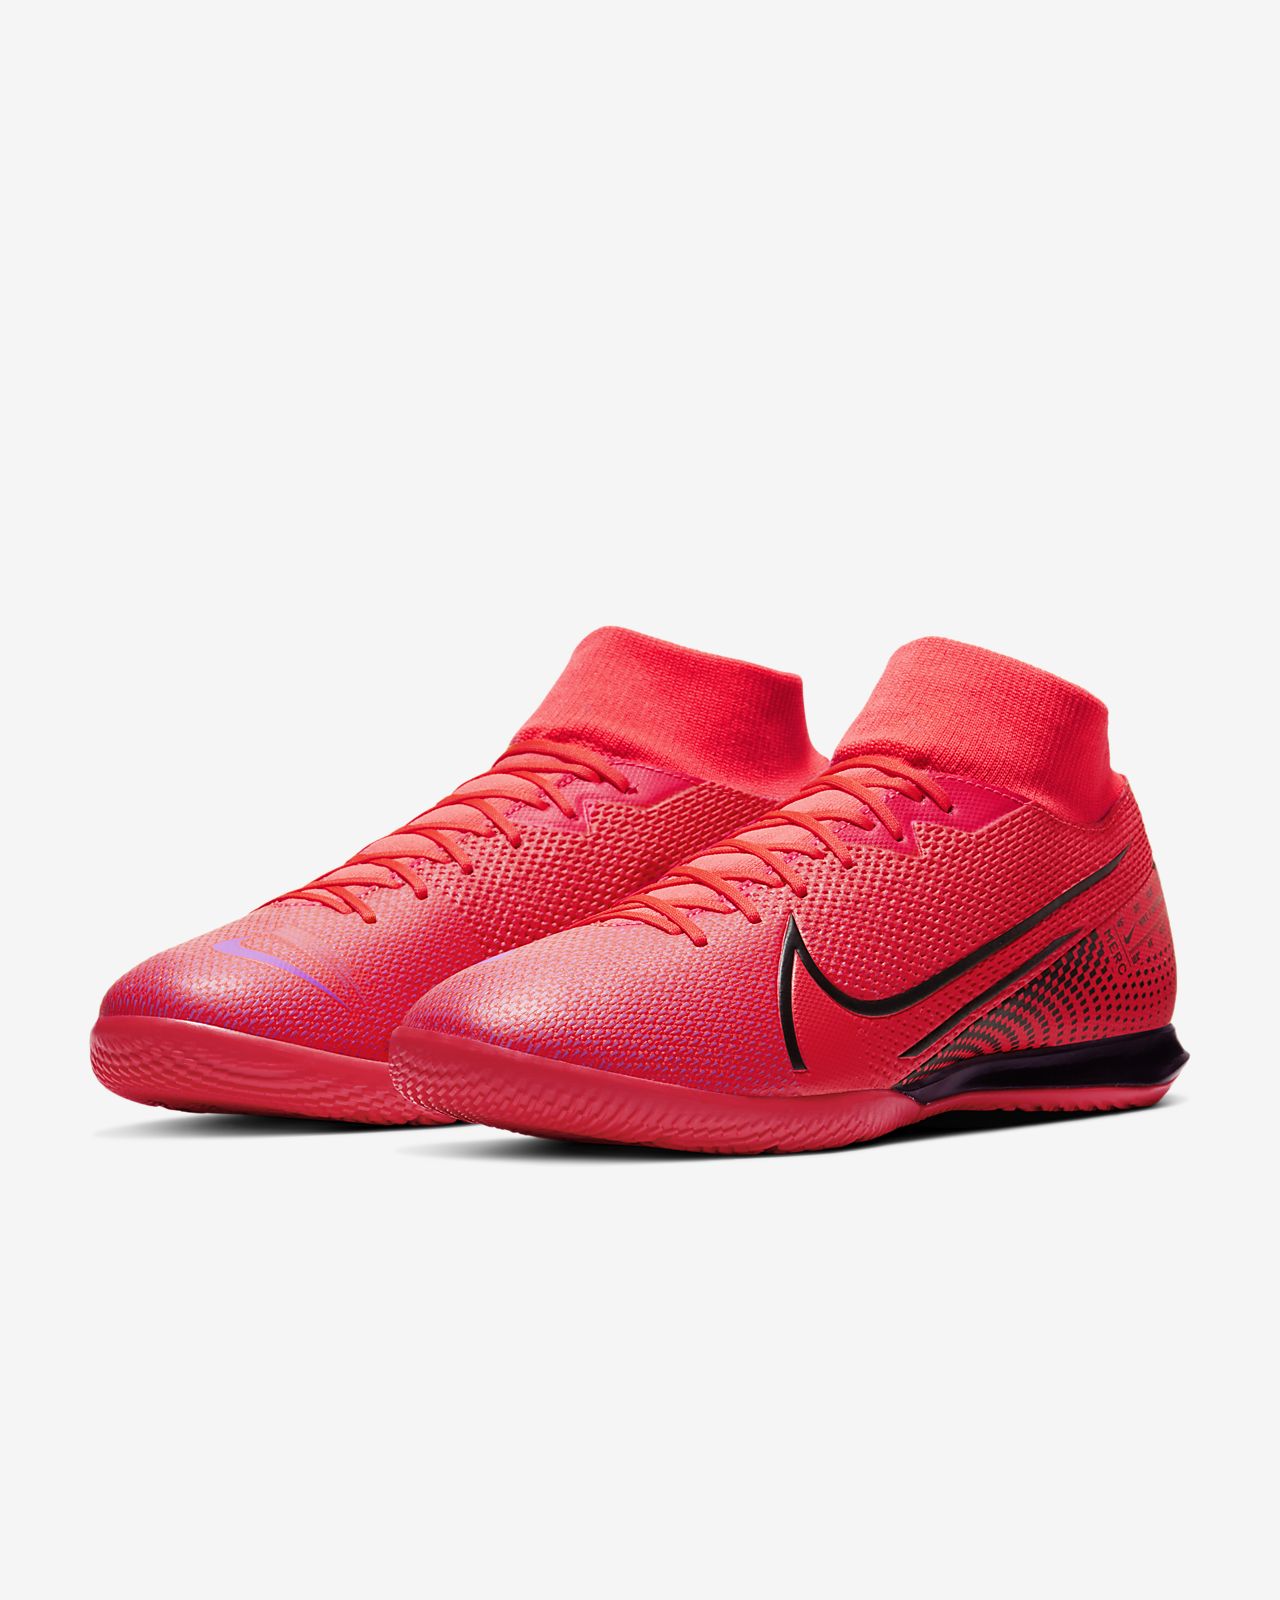 nike indoor soccer shoes canada